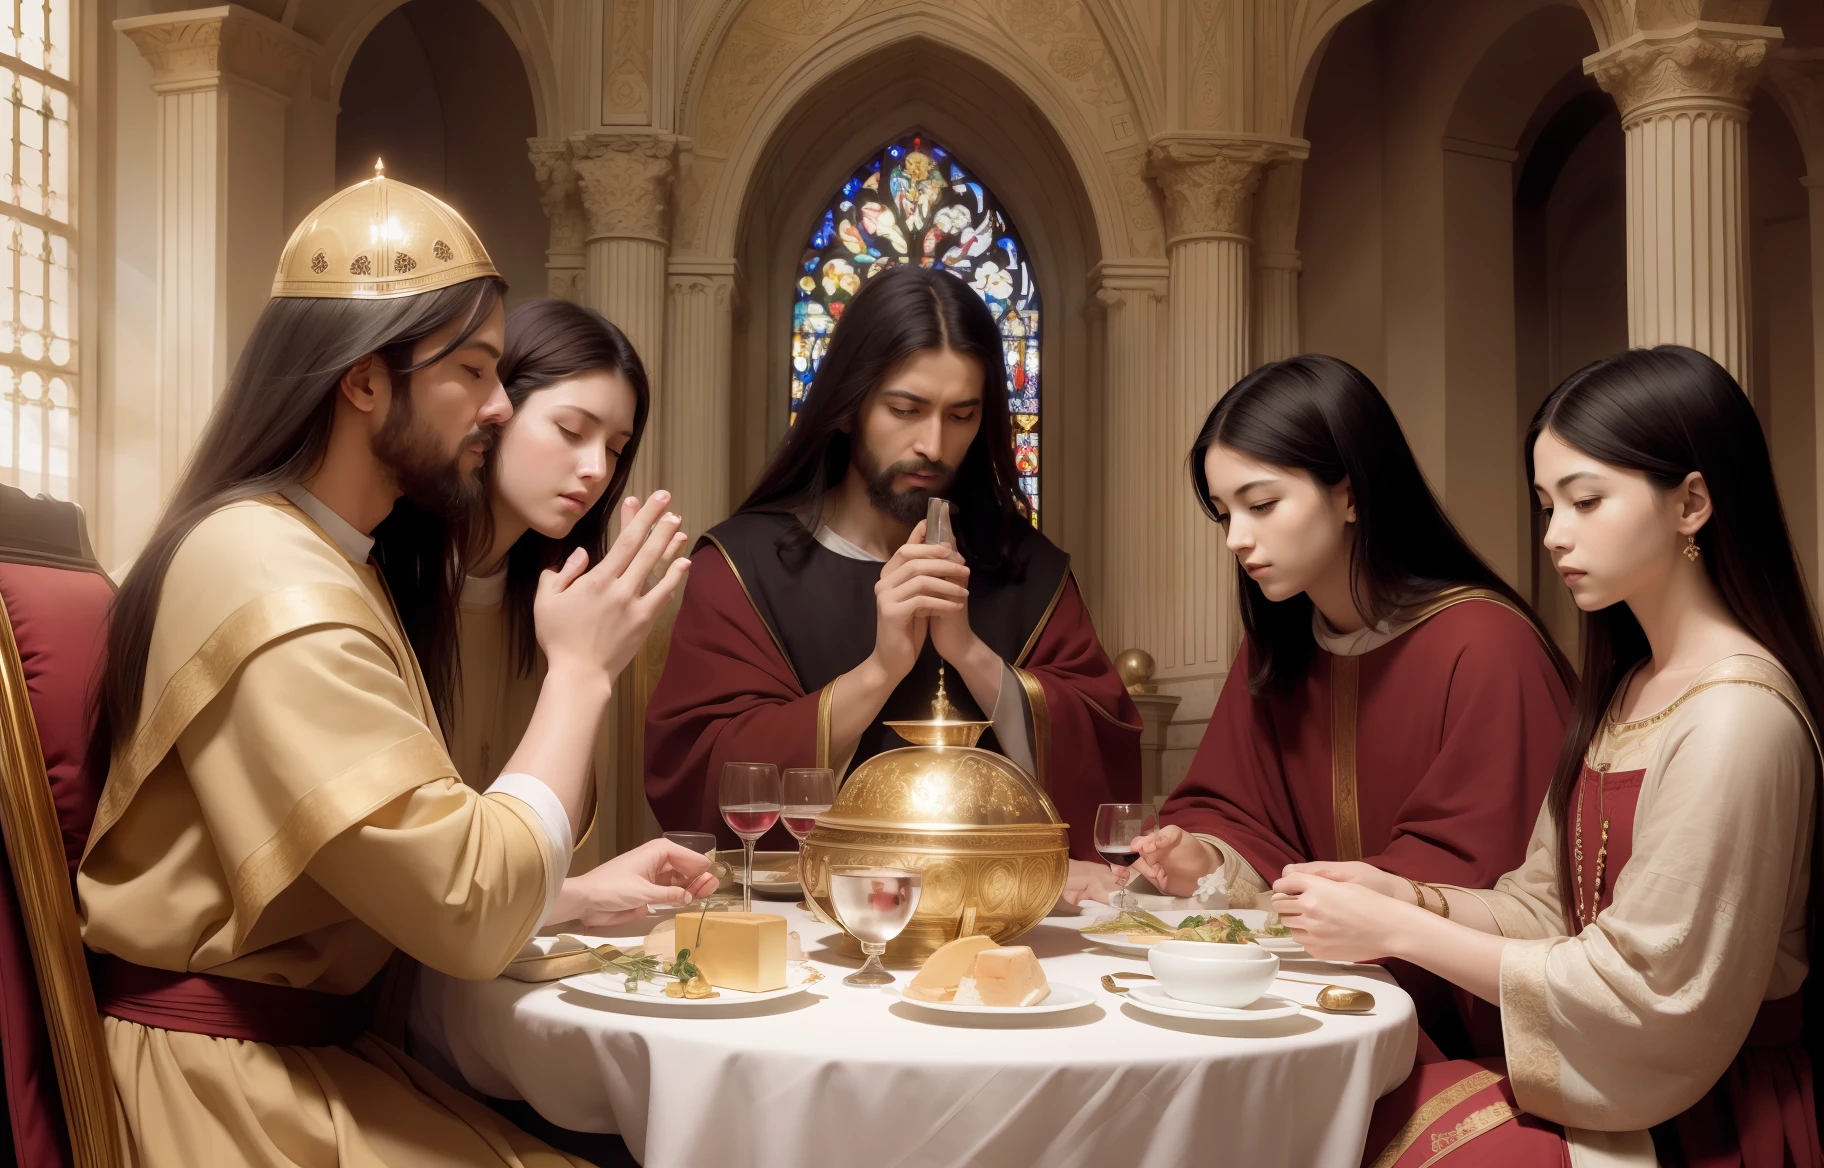 (masterpiece, best quality), a Holy Supper painting with a divine atmosphere, ultra-detailed, dynamic pose, warm light, peaceful and solemn, long dining table with a (multitude of dishes), (12 apostles) seated on both sides of the table, one of them is Jesus, who is (on a throne), the others are listening attentively to him, (holy grail) is placed on the table, it is filled with (red wine), (12 halos) above the heads of the apostles, (chapel) in the background, high-resolution, realistic oil painting.